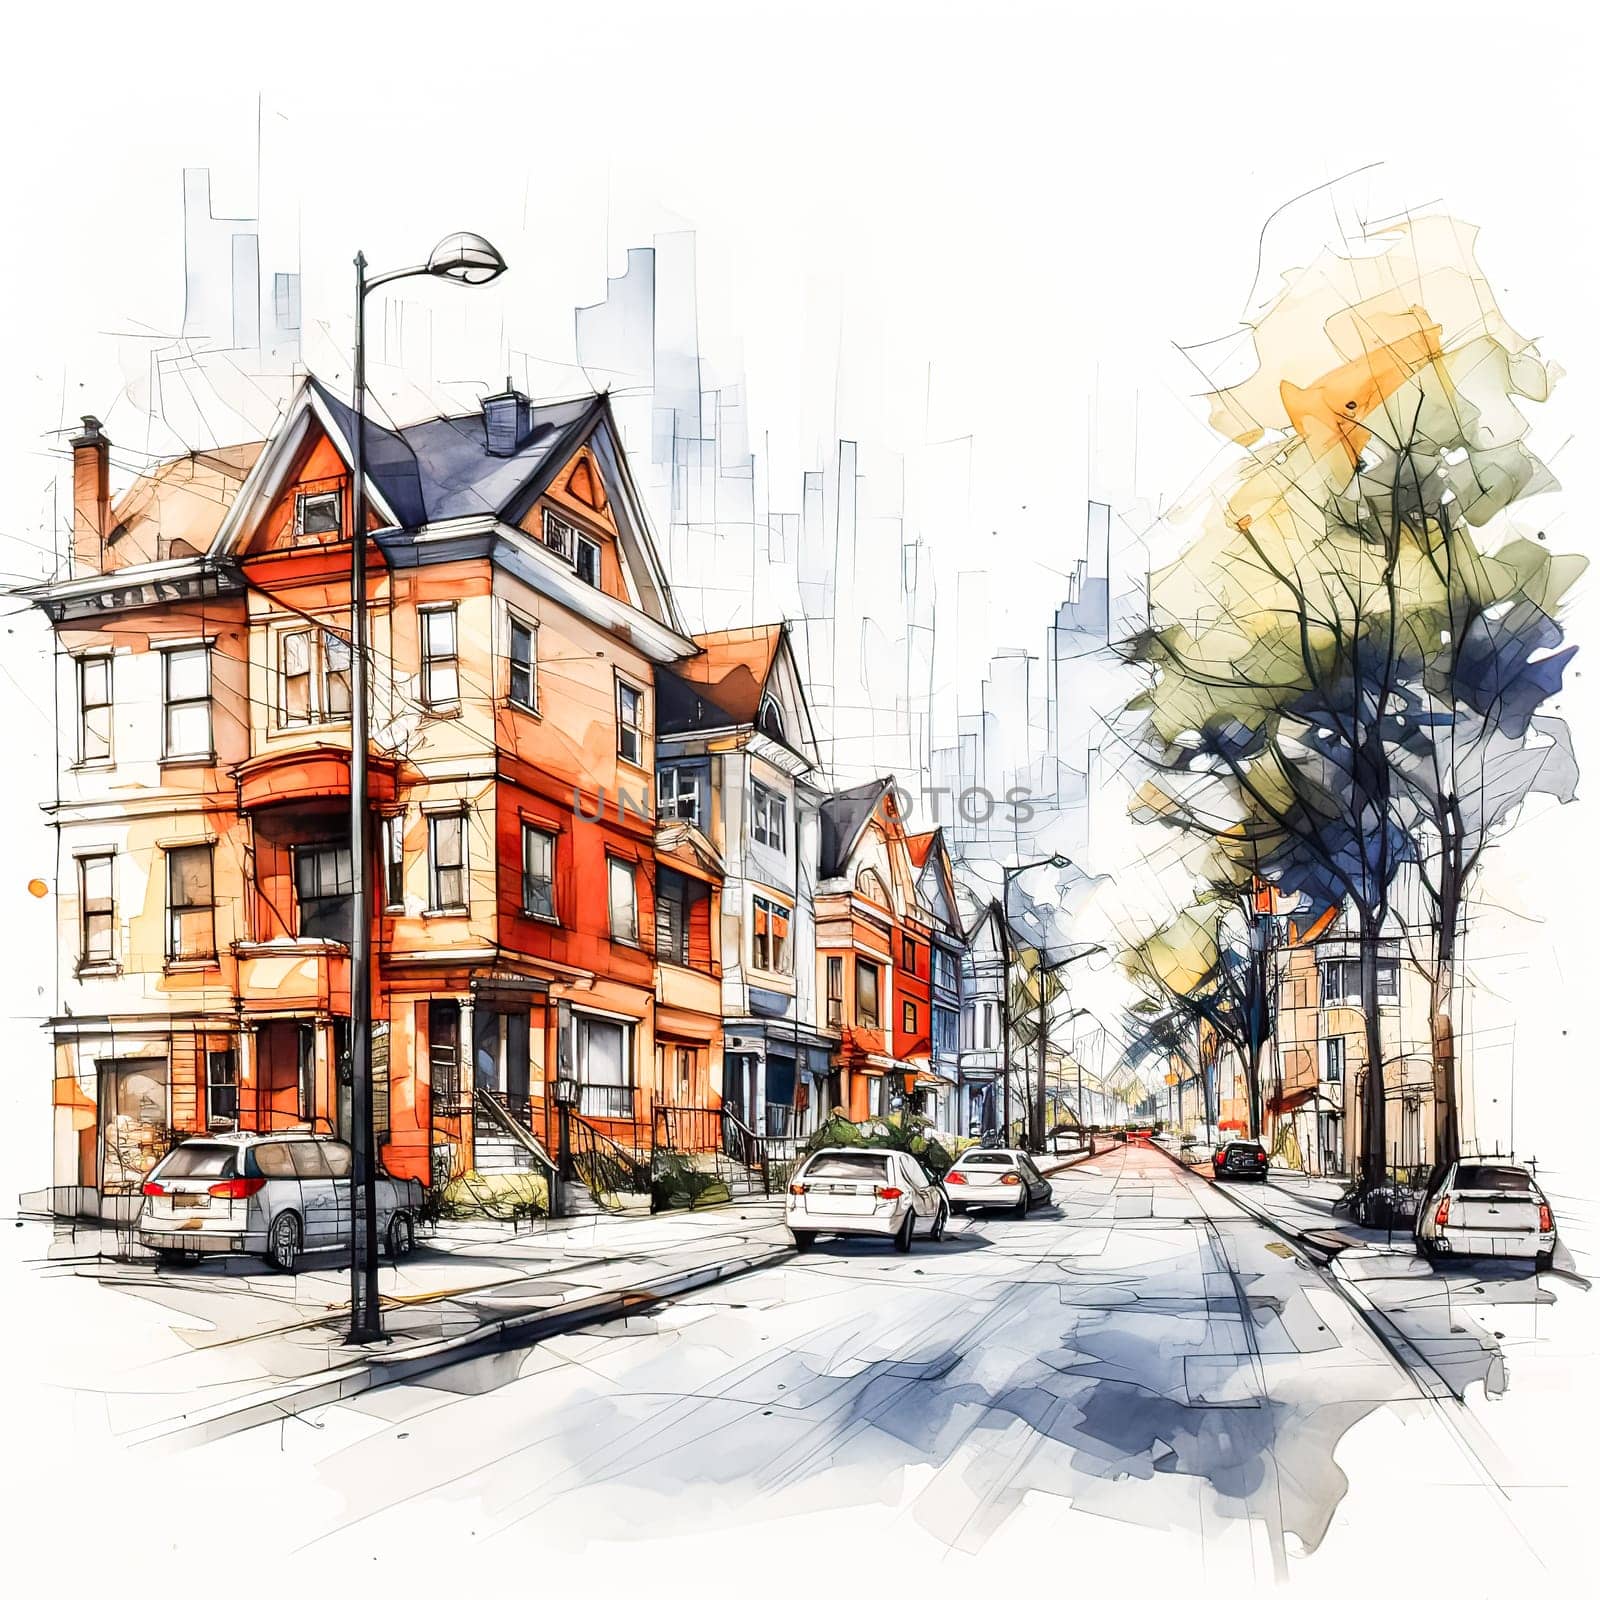 Architectural Harmony, Sketch in watercolor liners highlights the charm of multi colored houses in a quaint town